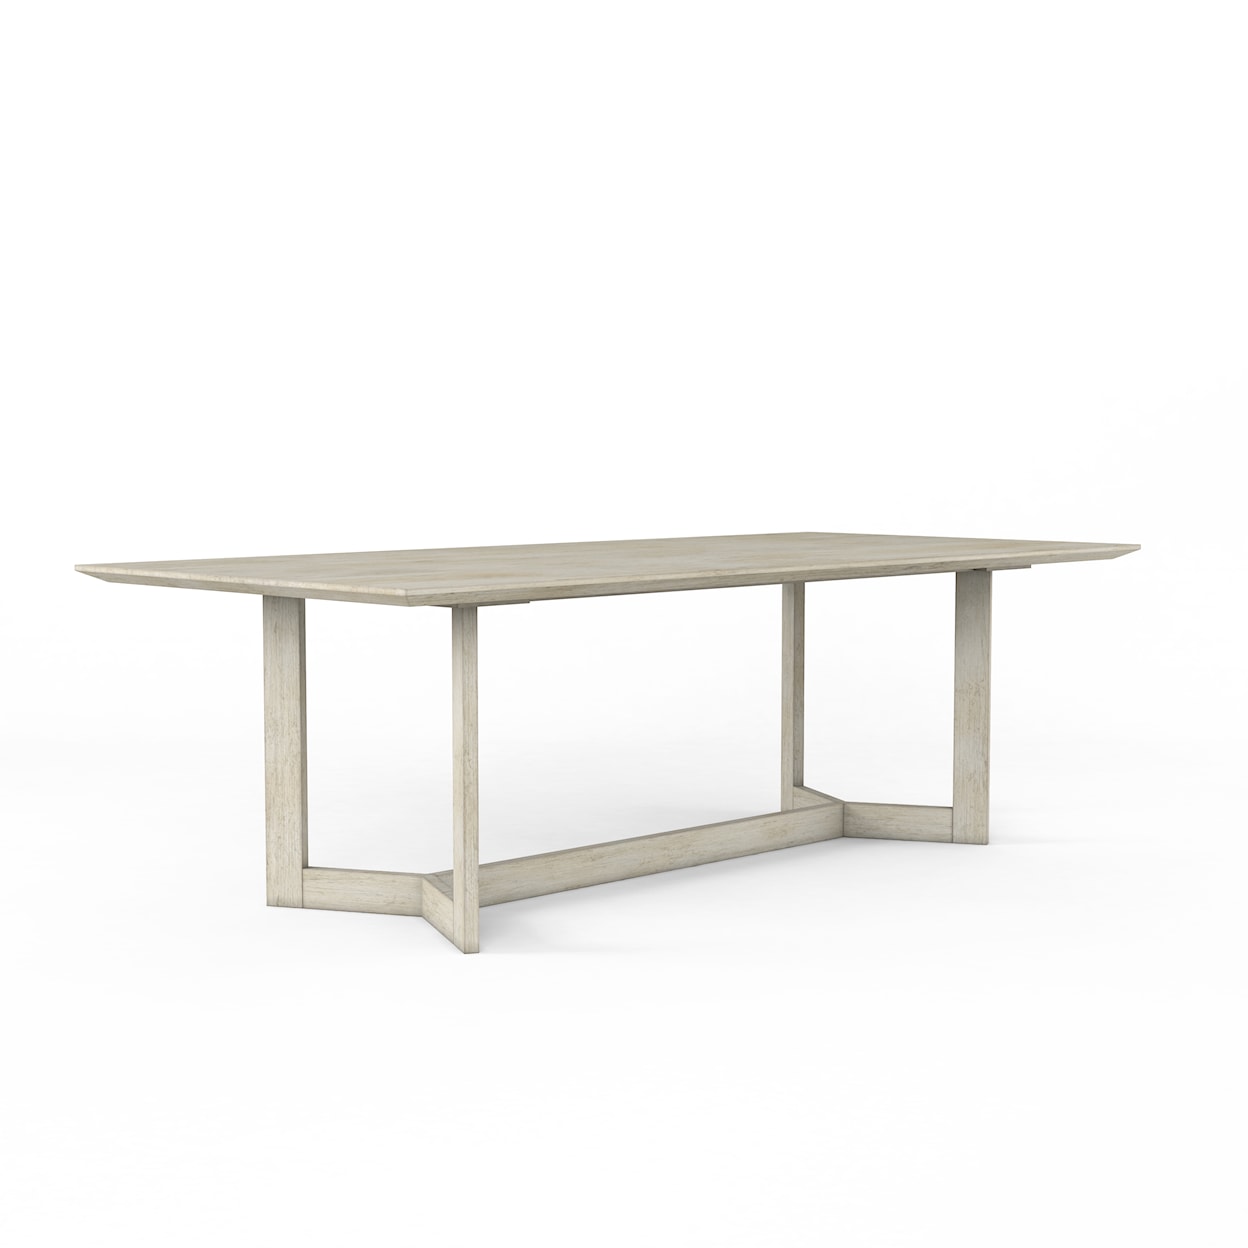 A.R.T. Furniture Inc Cotiere Rectangular Dining Table 